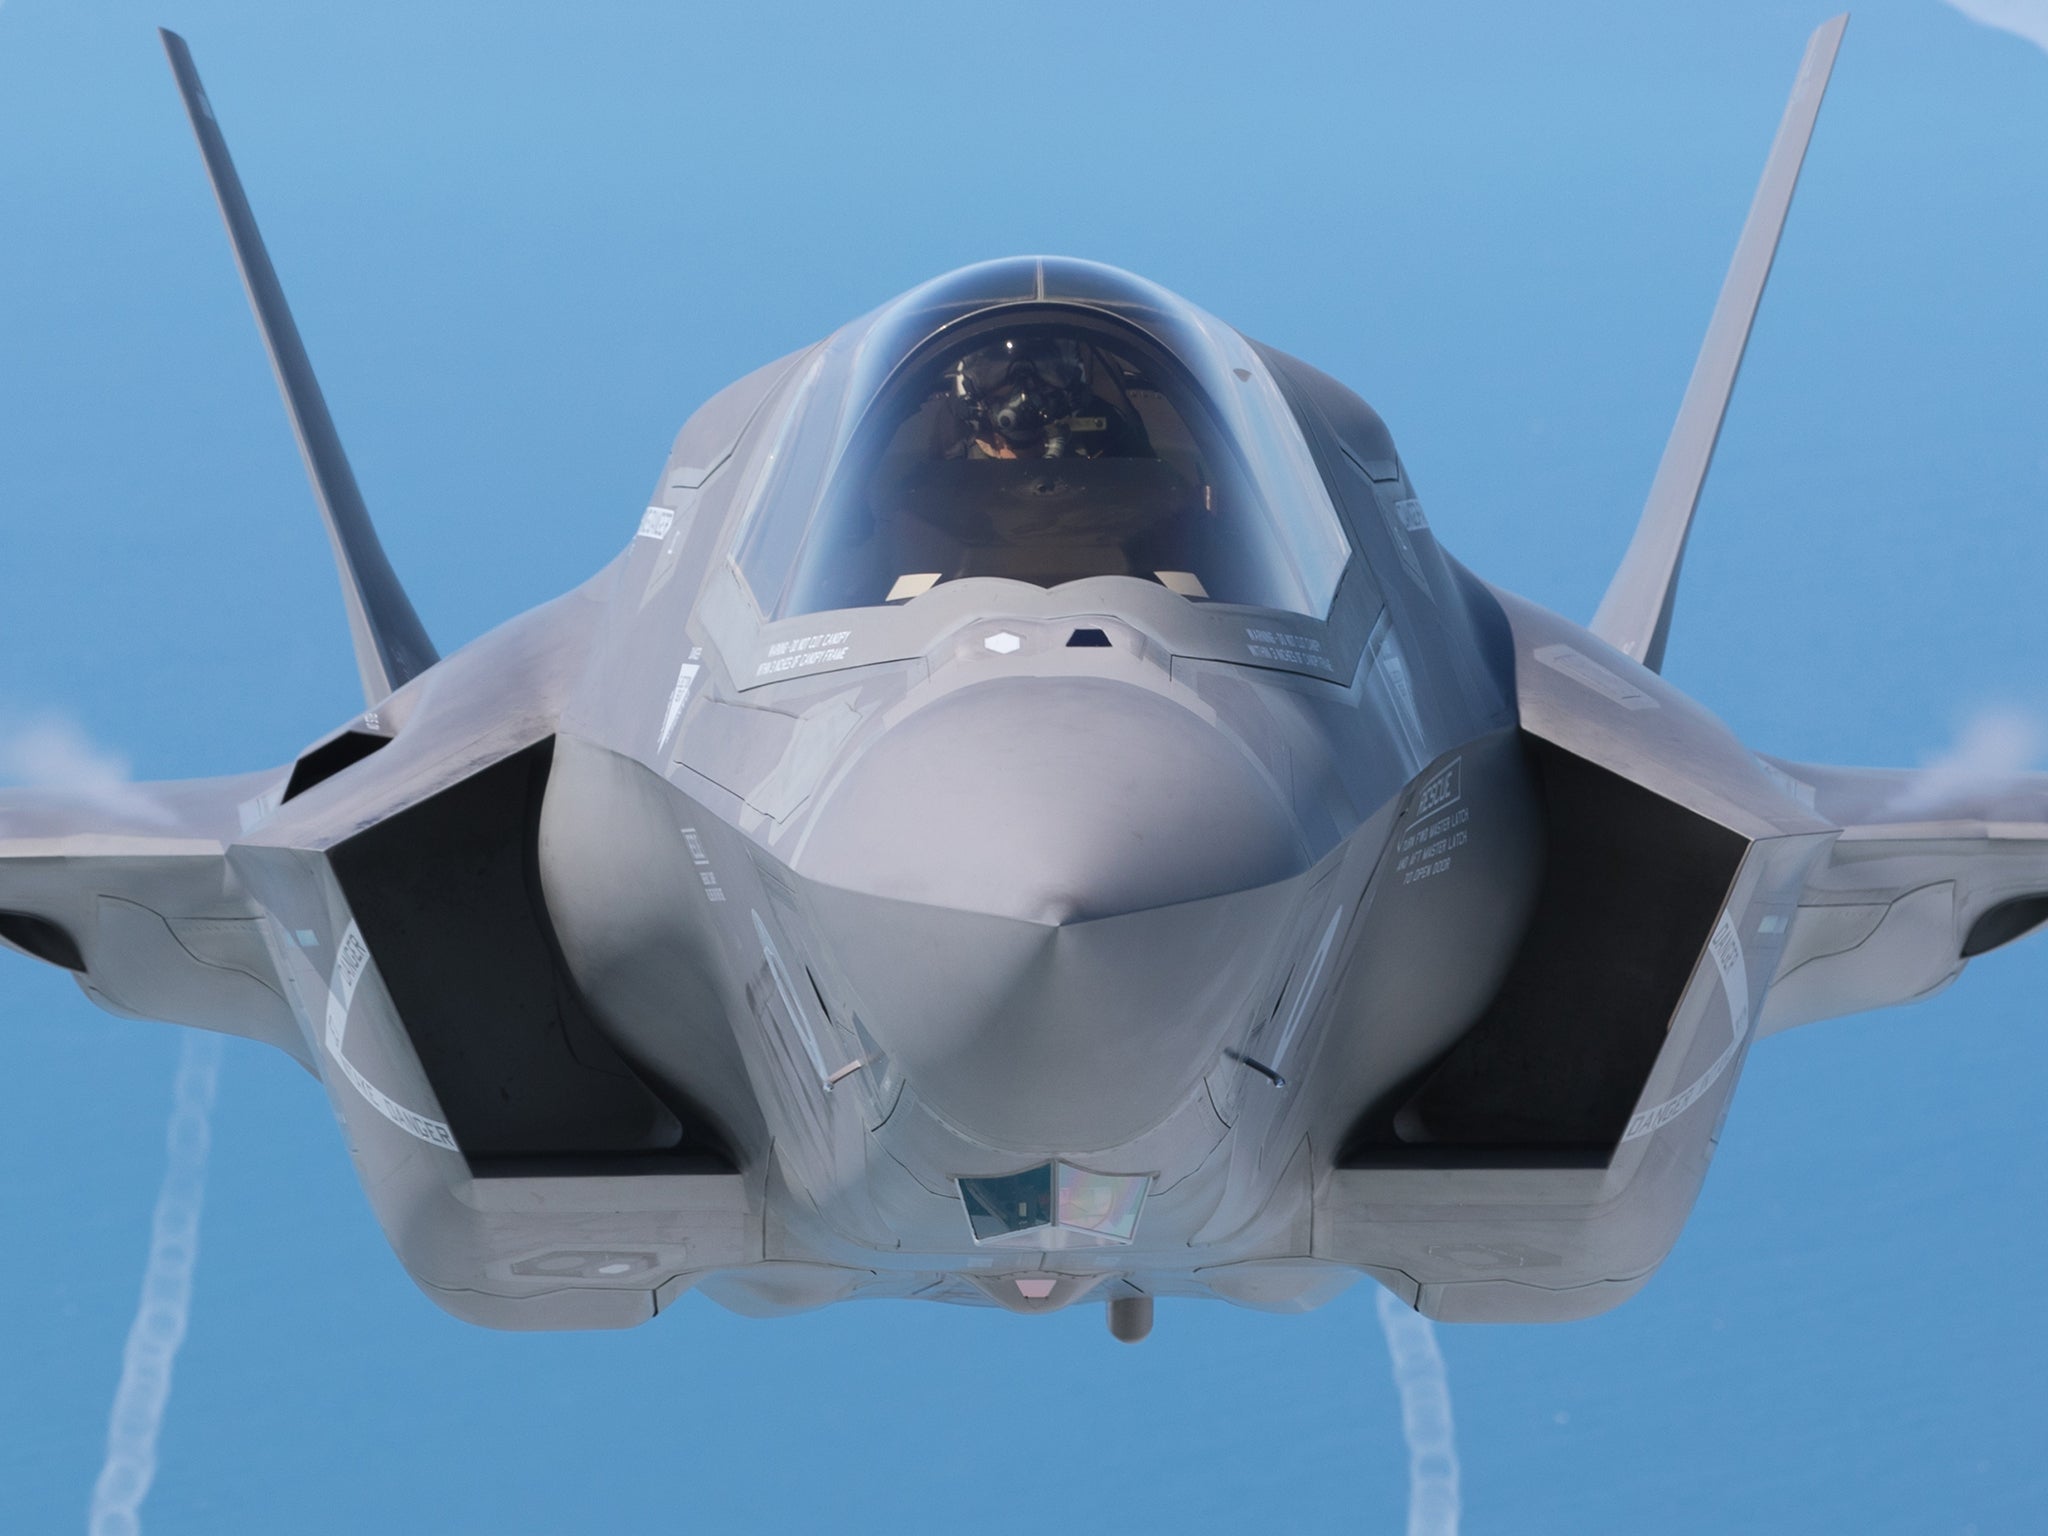 An F35 fighter jet. Donald Trump said the 'F35 program and cost is out of control'.